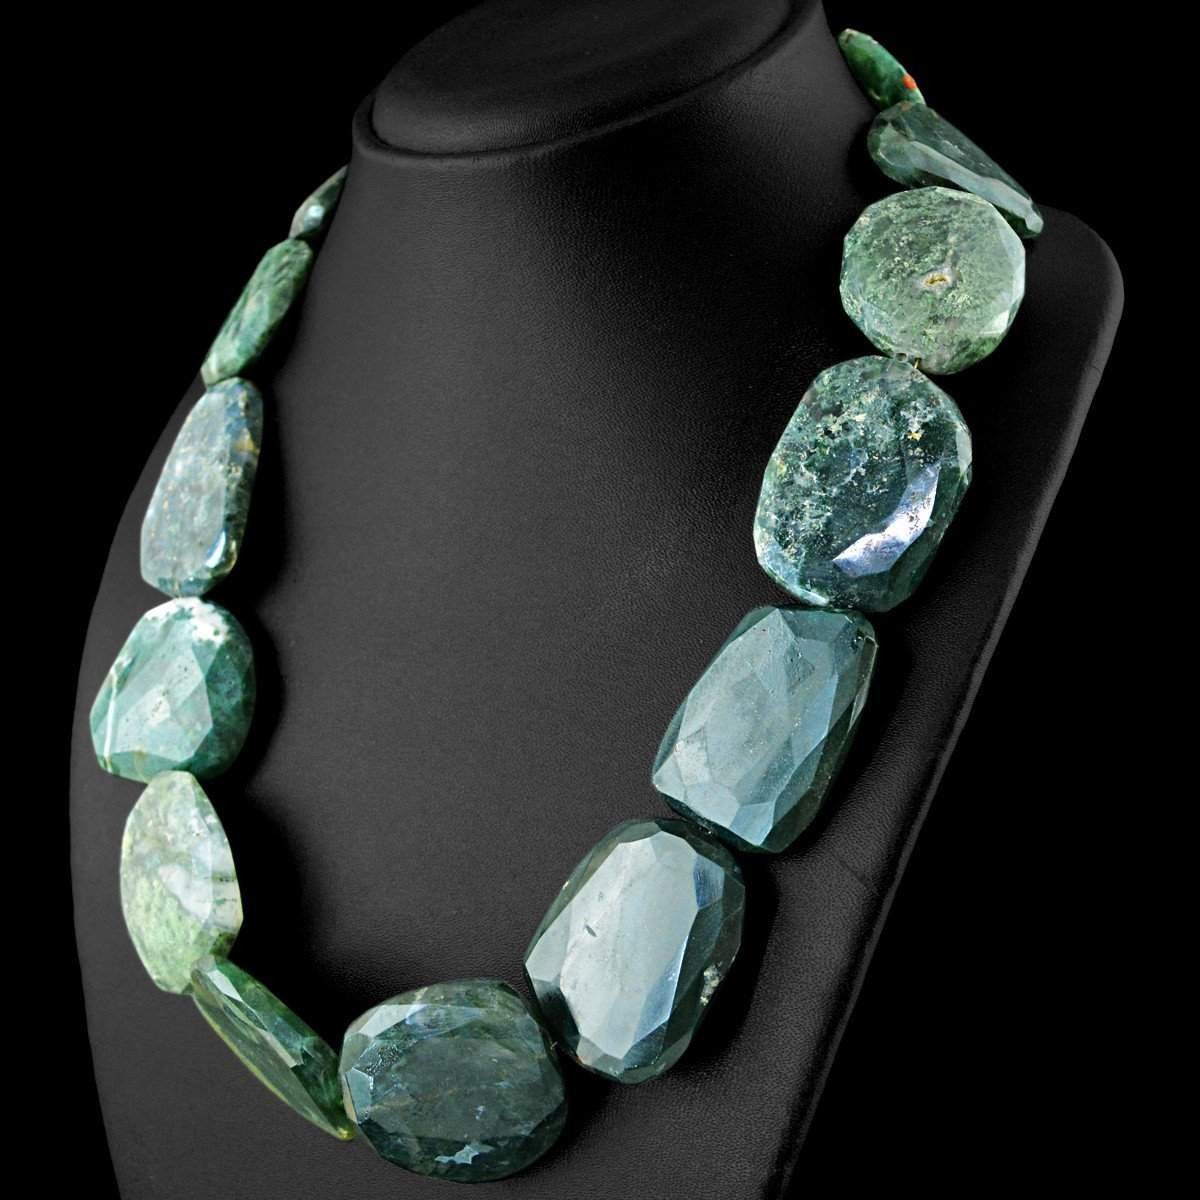 gemsmore:Natural Green Moss Agate Necklace Faceted Beads